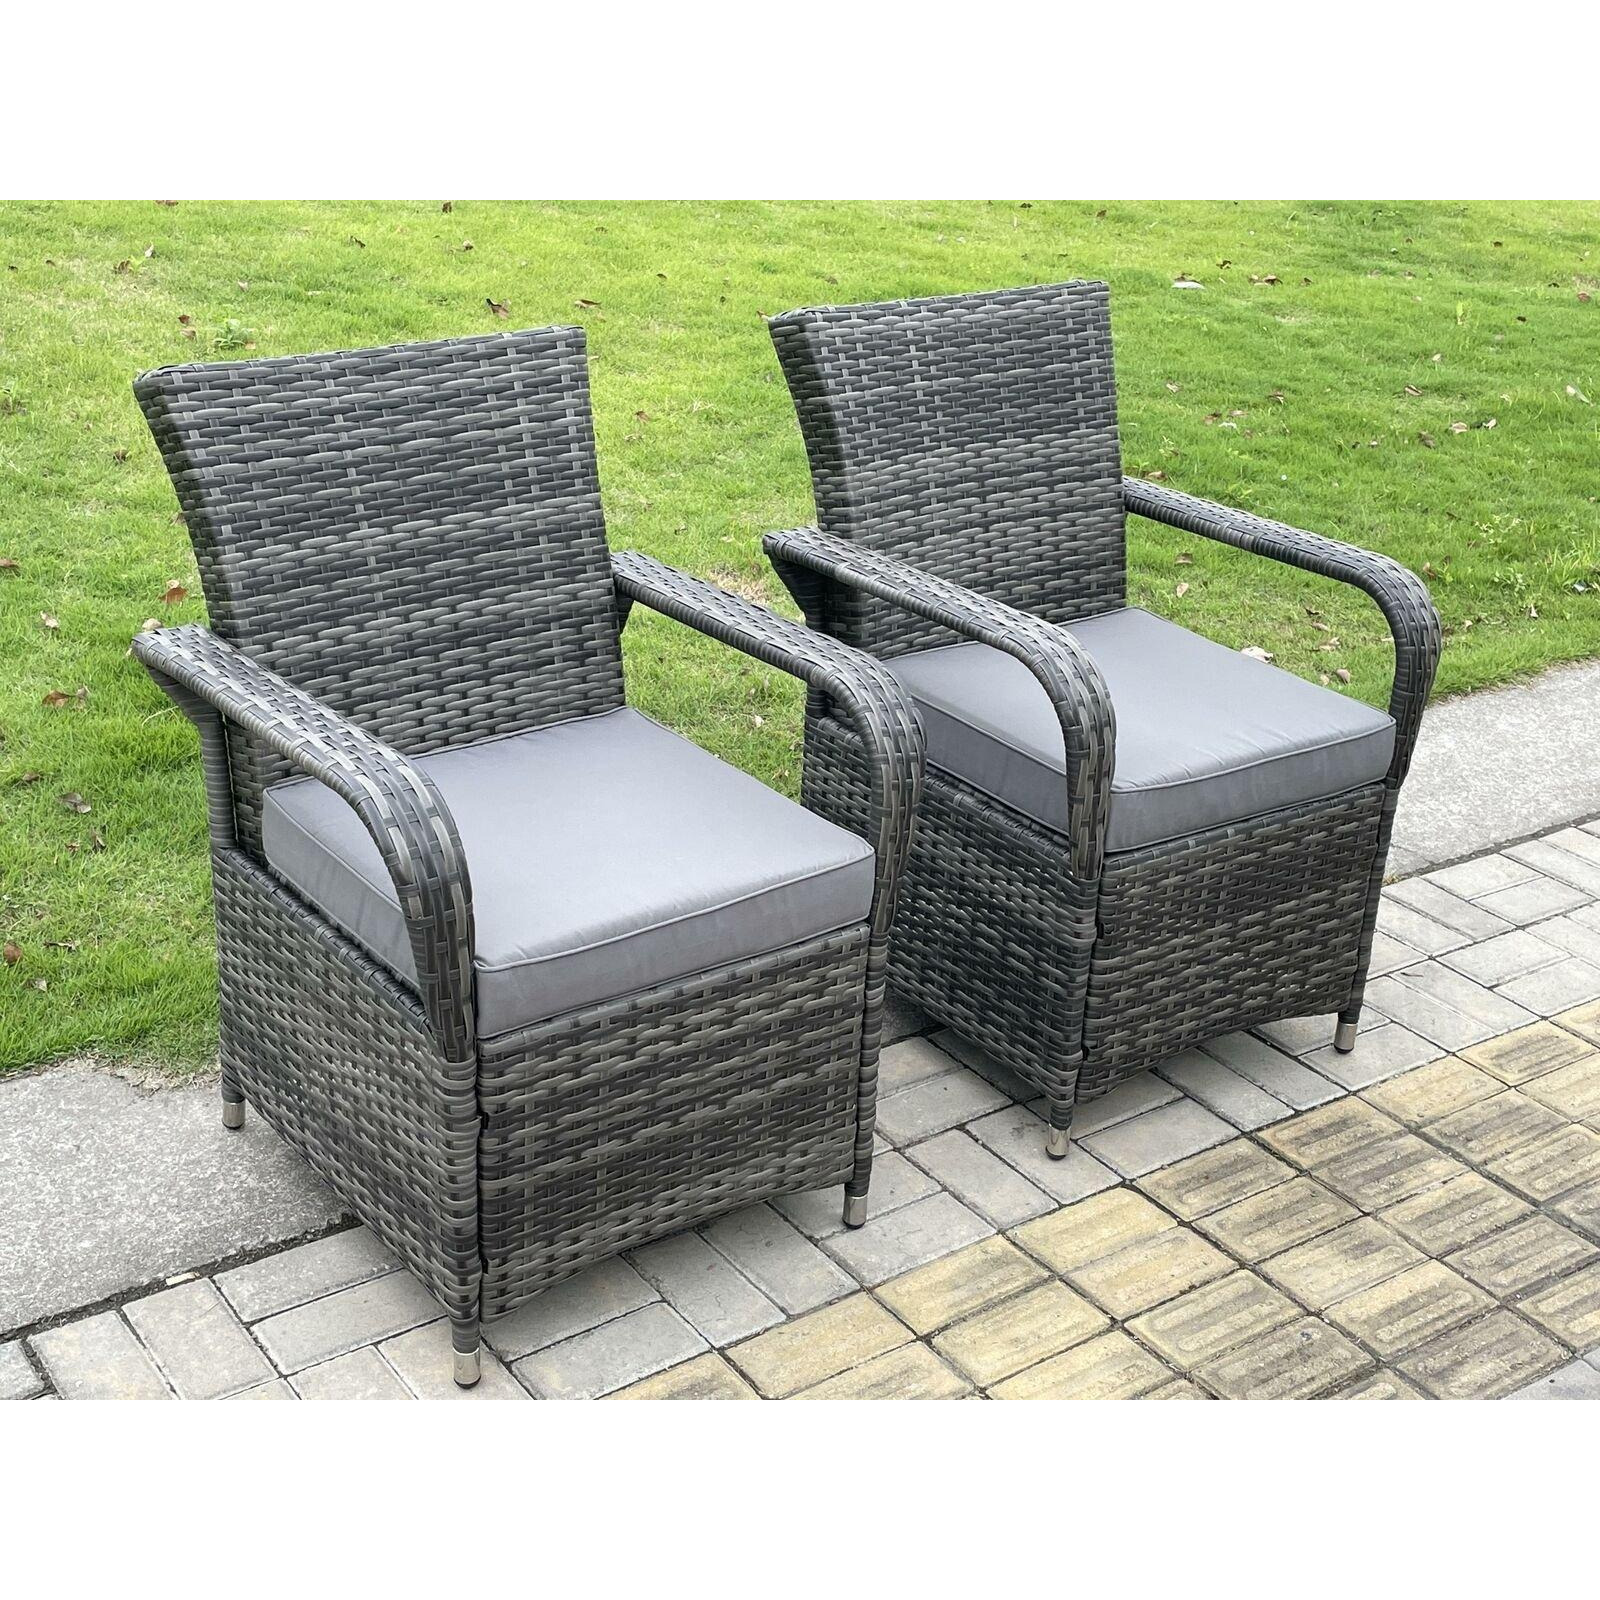 Rattan Garden Furniture  Chairs Wicker Patio Outdoor 2 Chairs - image 1